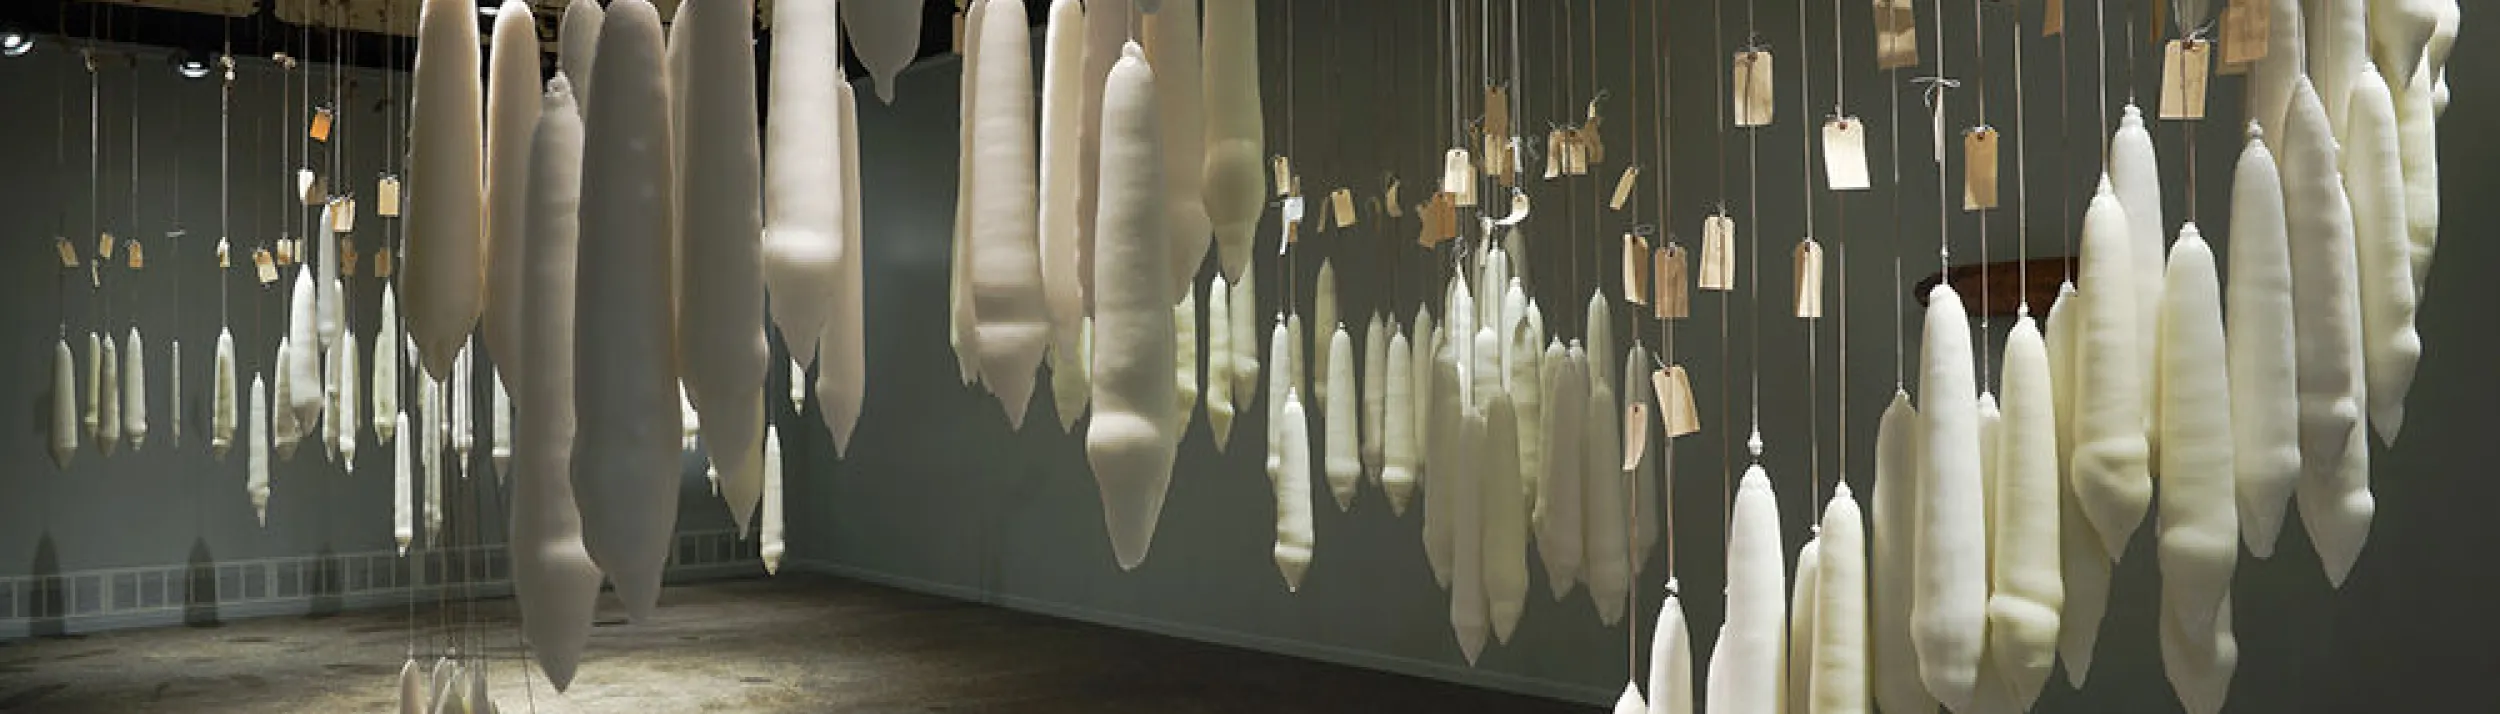 A large collection of candles dipped the same number of times as the lifespans of people attached to them; they hang from the cieling in various arrangements.